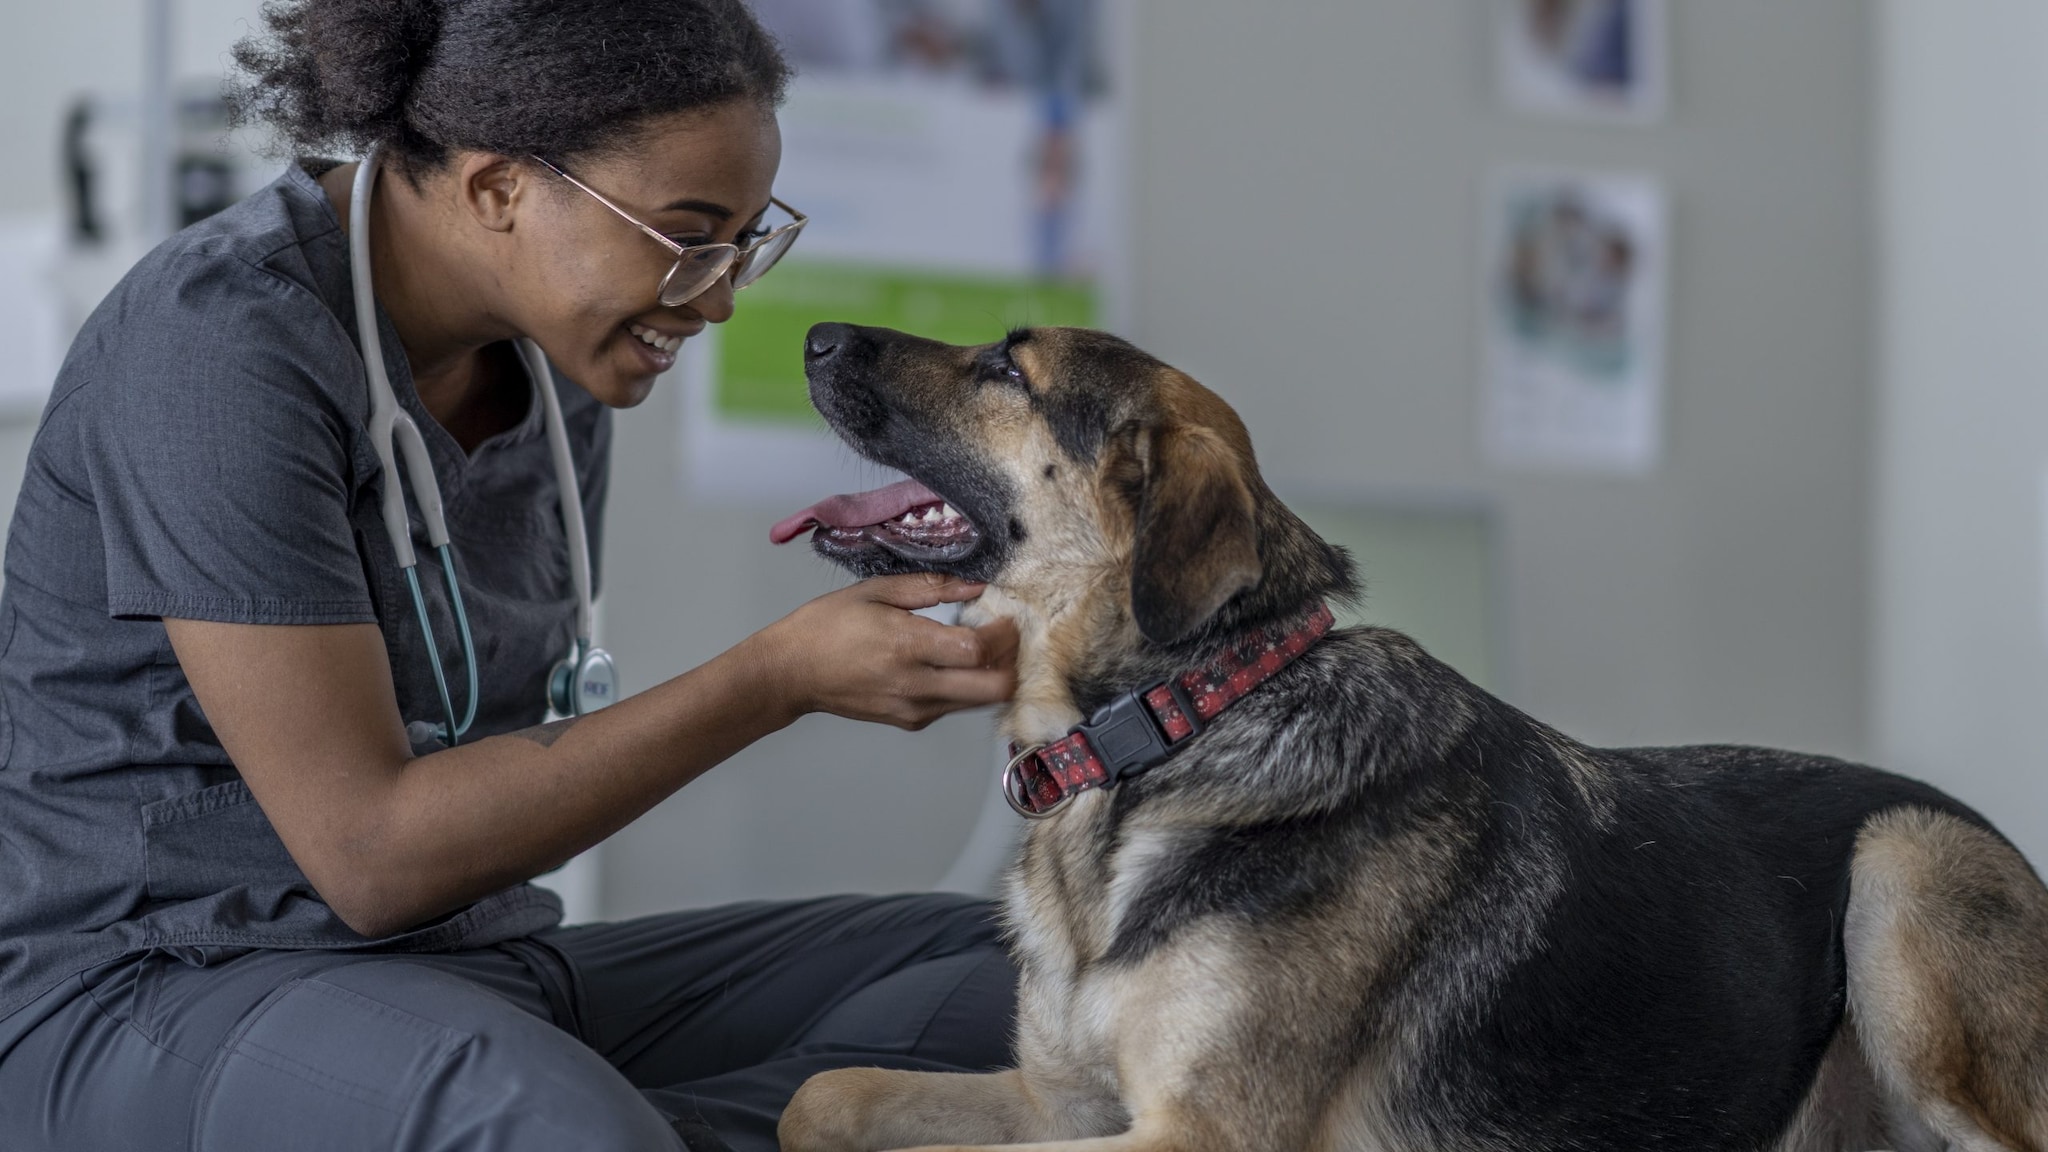 Smiling person wearing medical scrubs and a stethoscope petting a black and tan dog under its chin